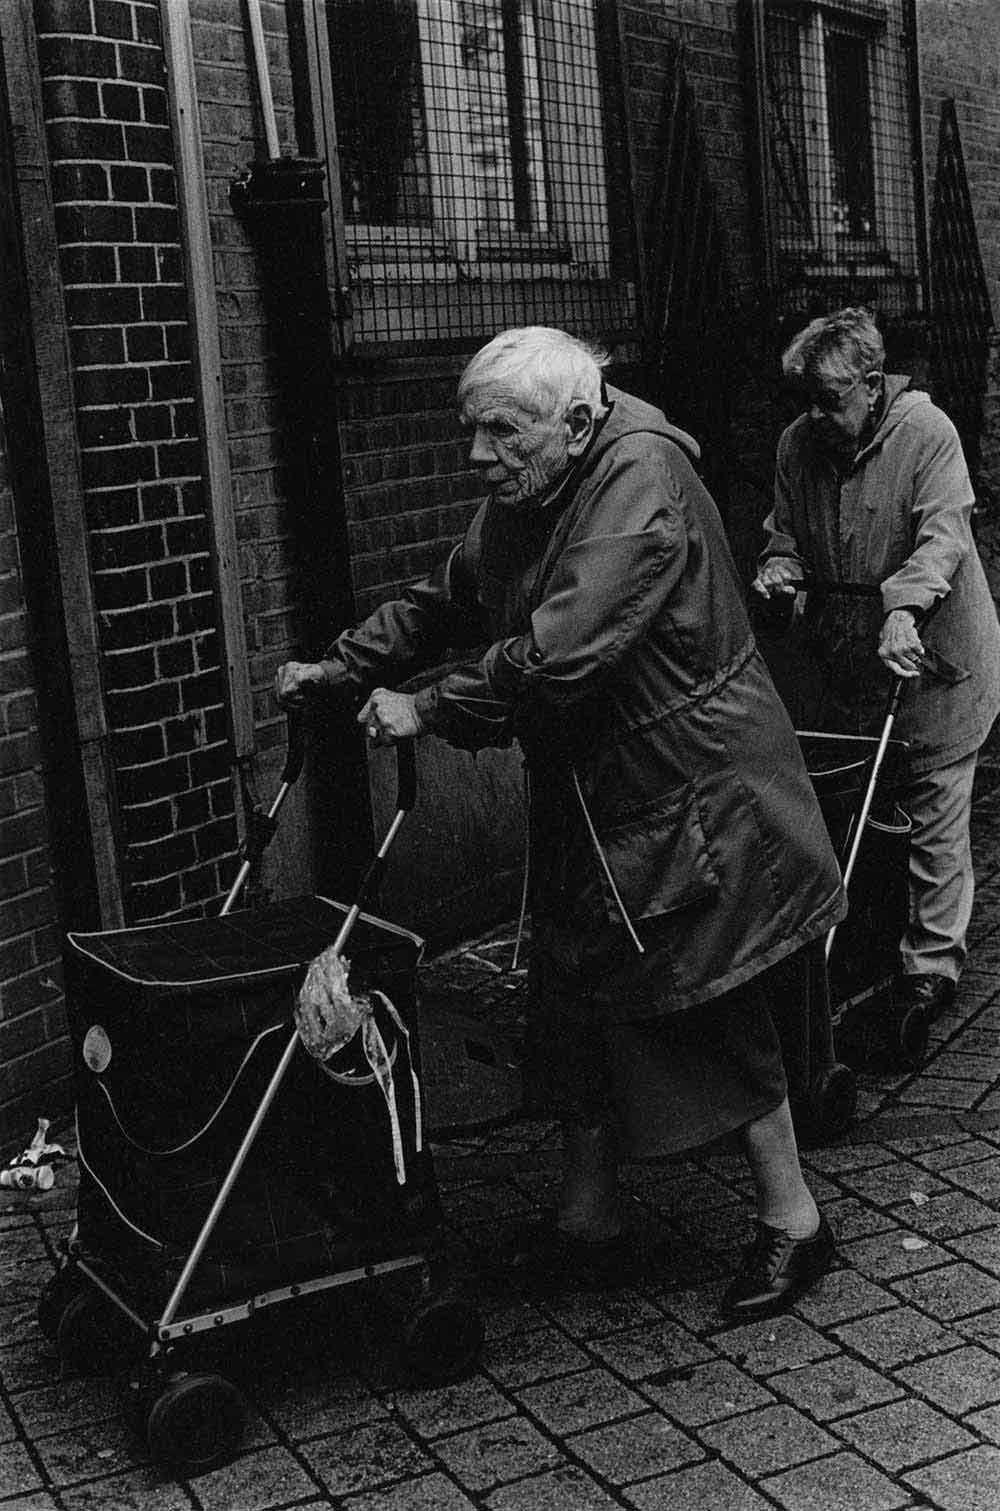 Two elderly women pushing shopping trolleys, part of a series of photographs by Stephie Devred that captures the unique spirit of the East London street market, Roman Road Market.